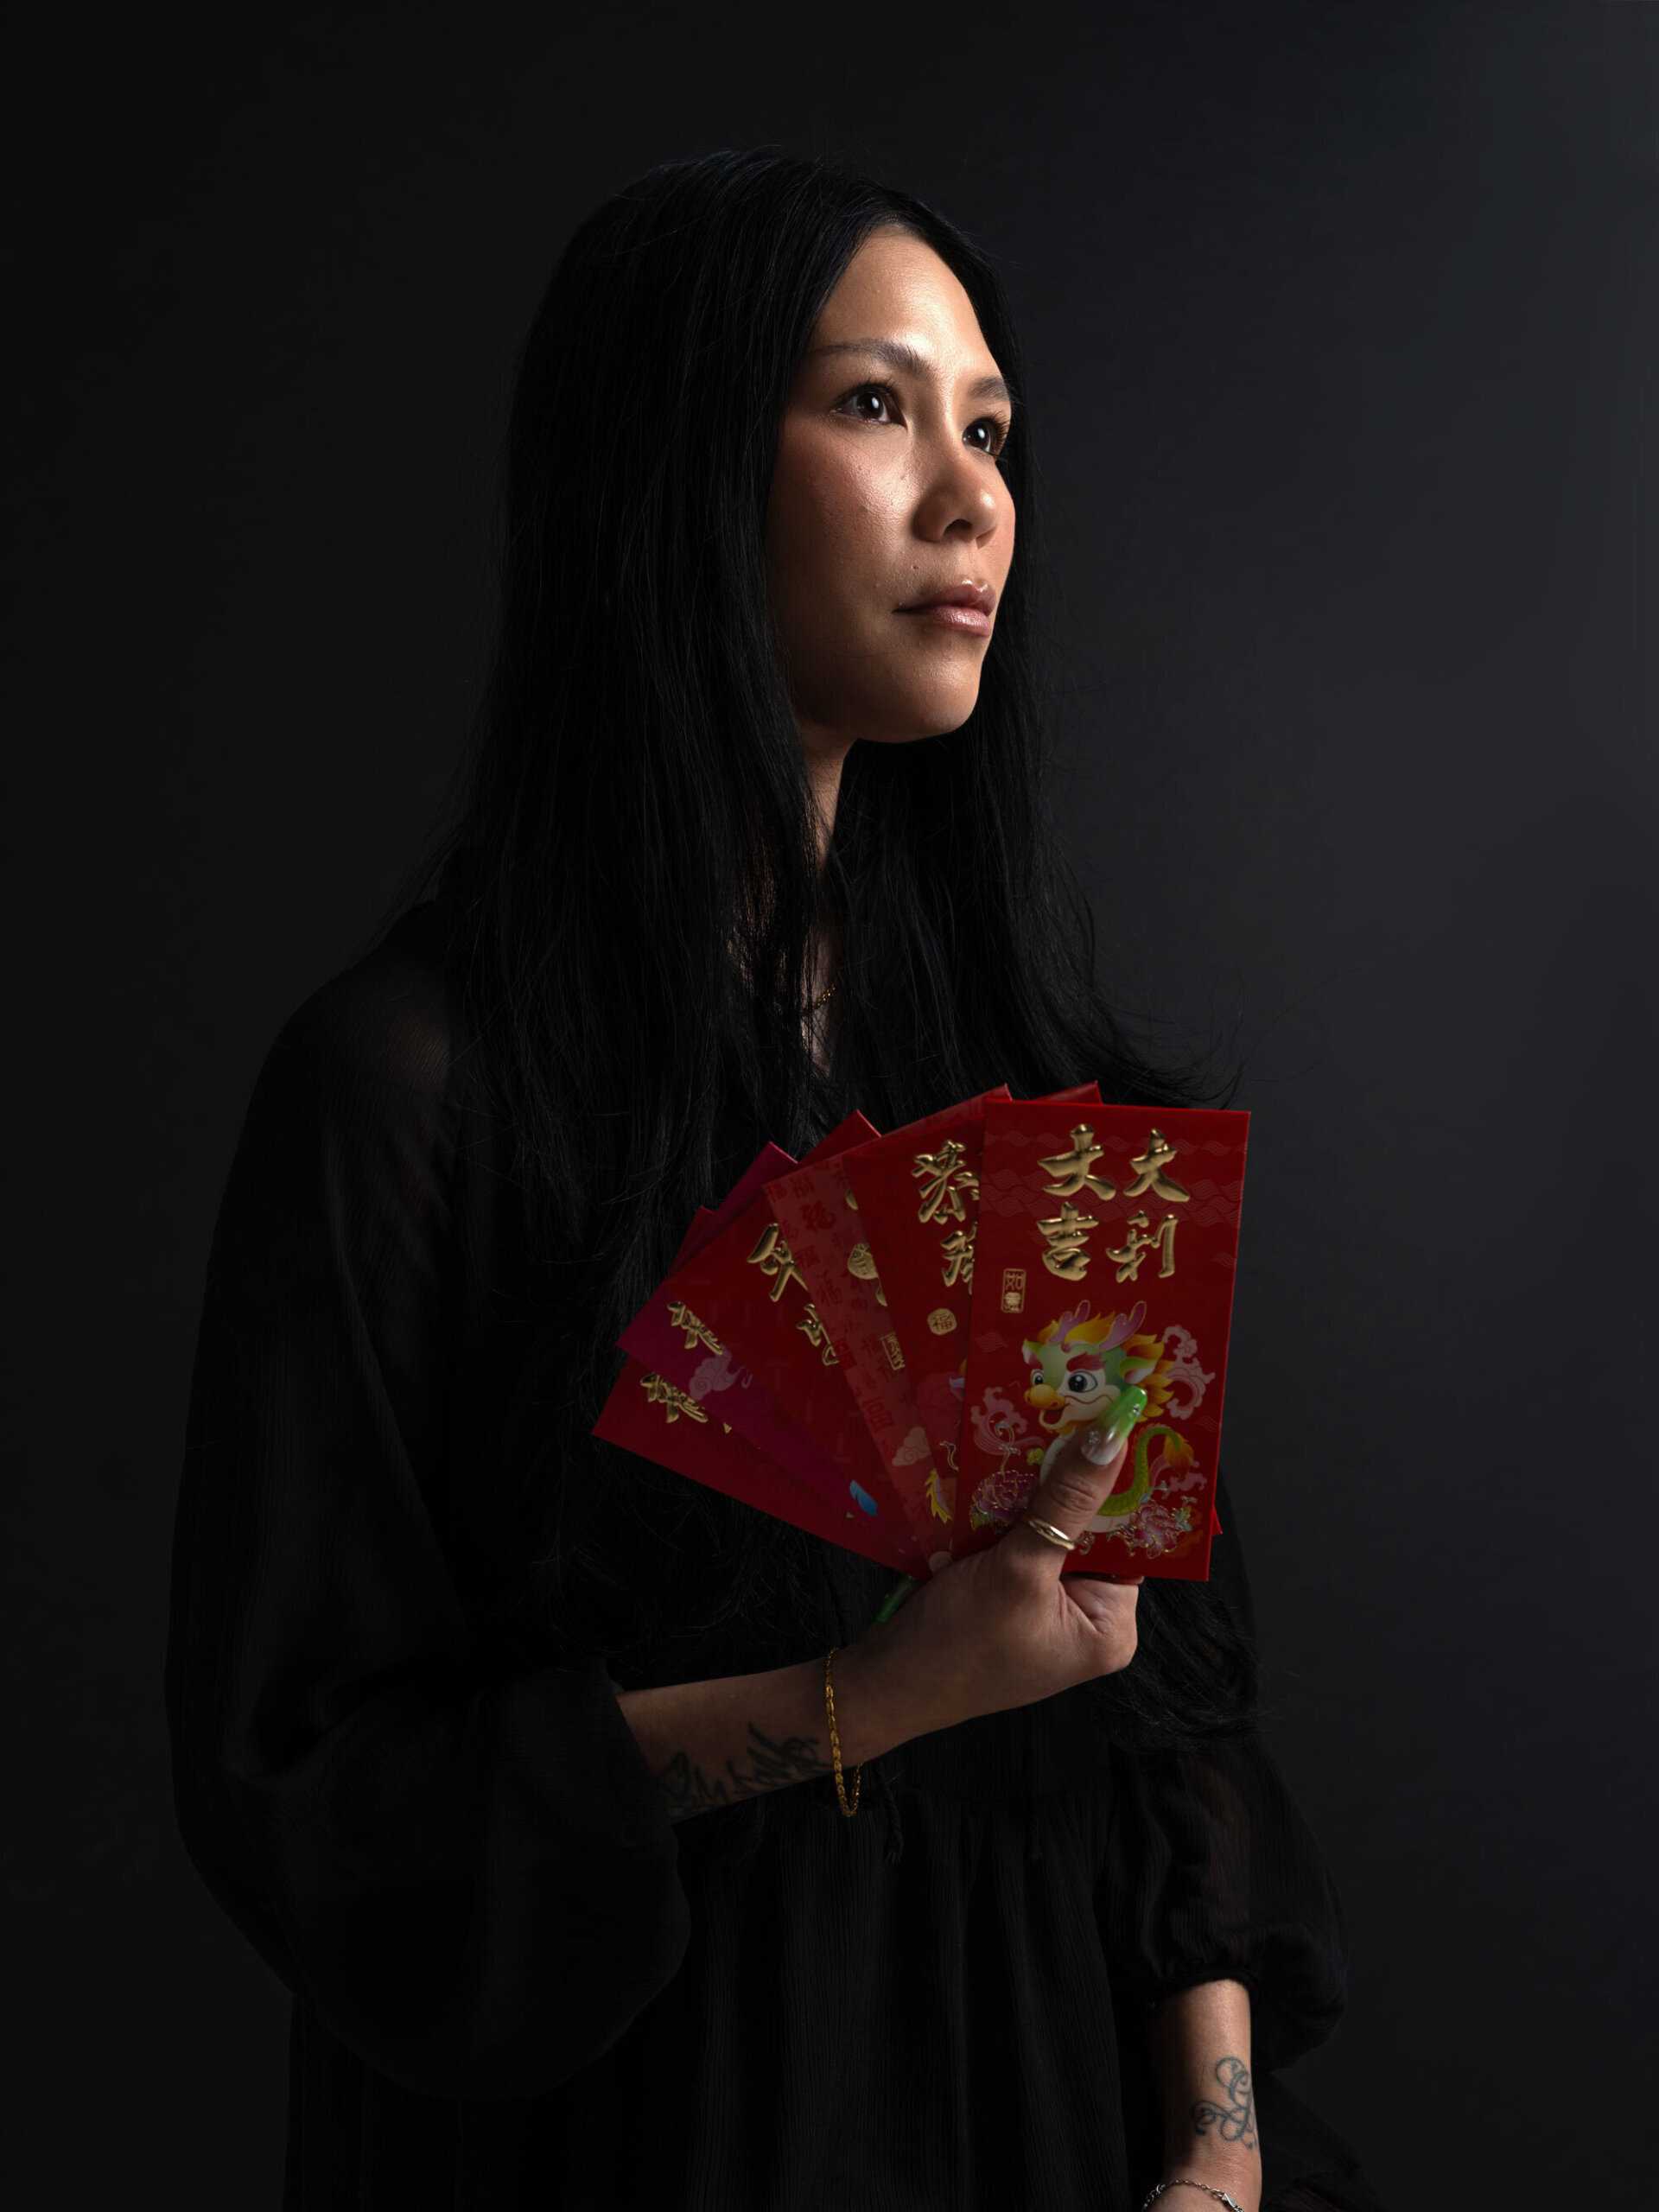 A person with long hair holds several red envelopes with Chinese characters and a dragon design, standing against a dark background.